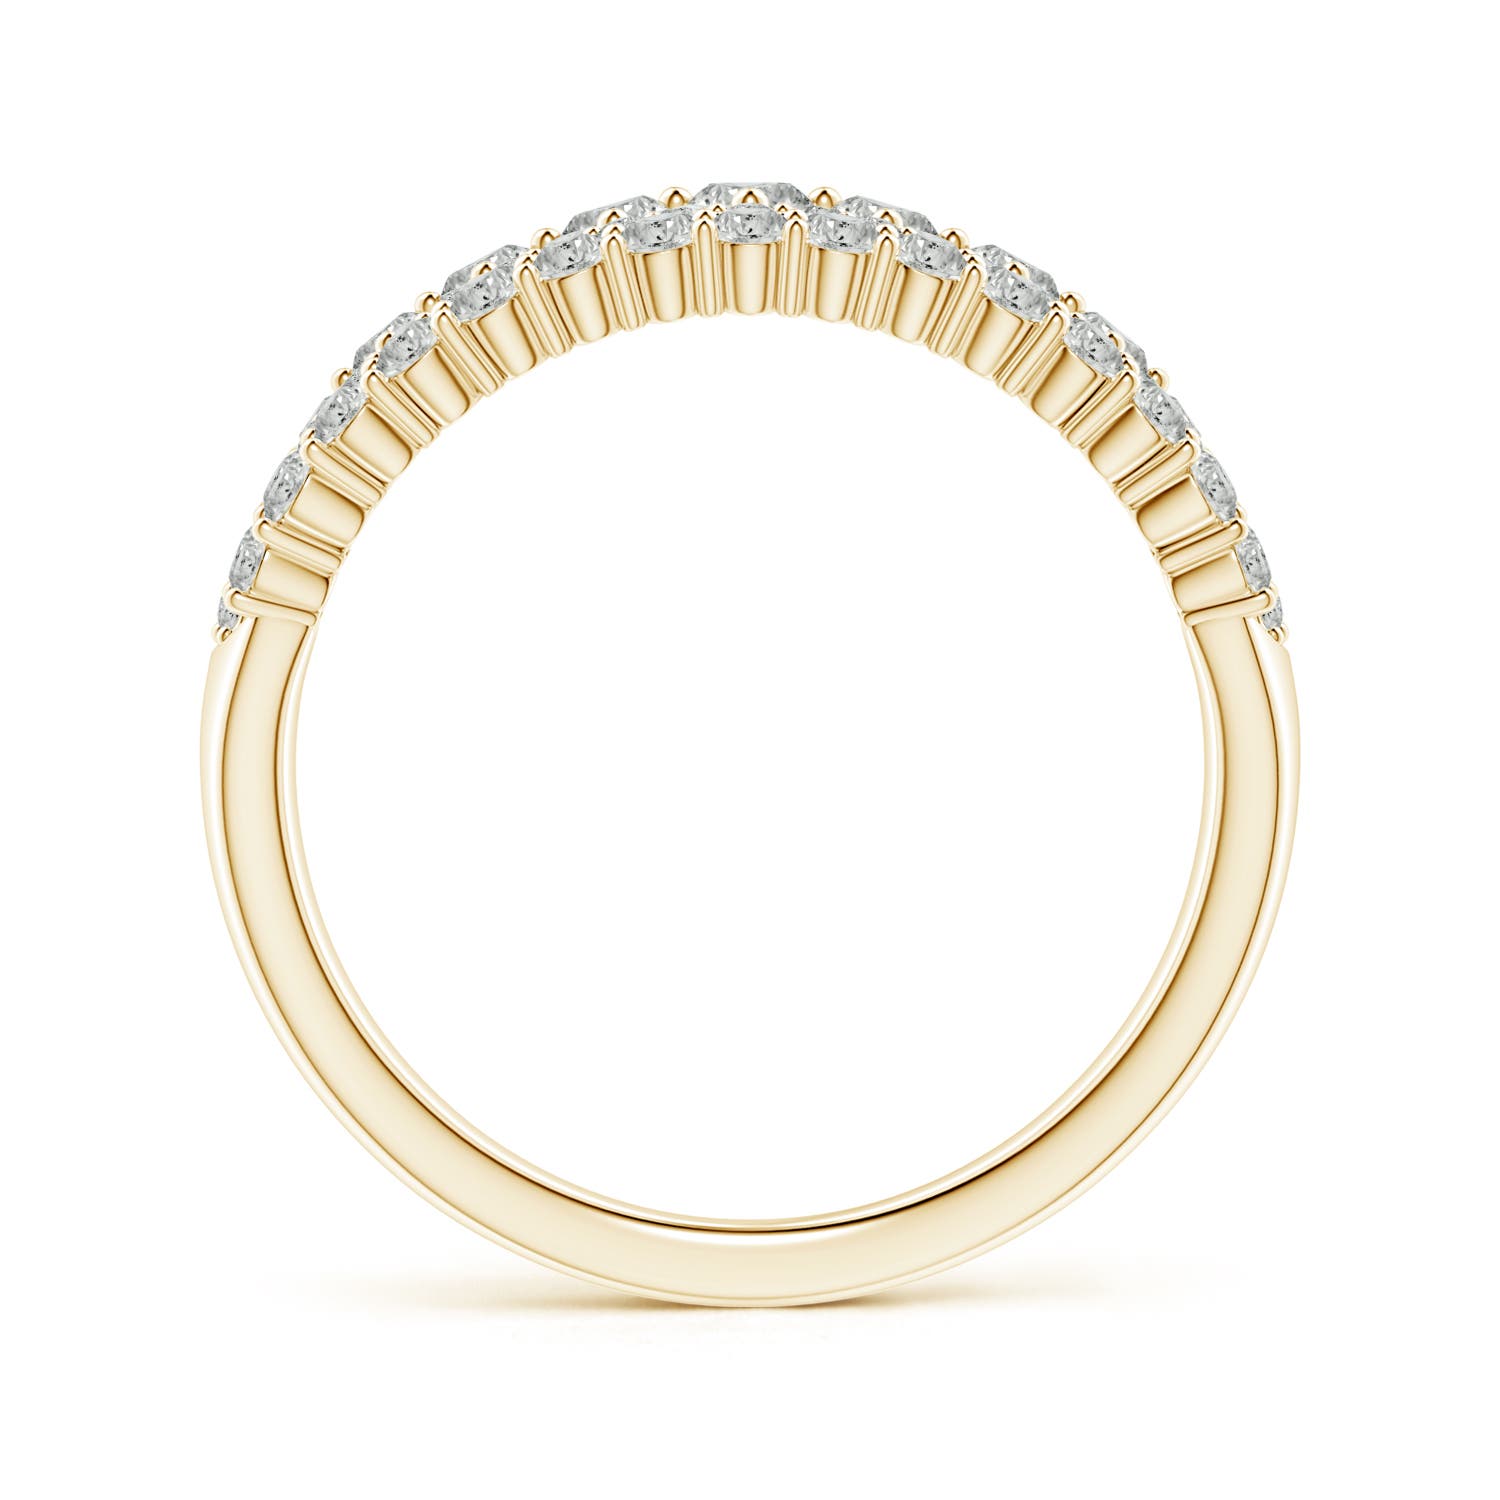 K, I3 / 1.75 CT / 14 KT Yellow Gold